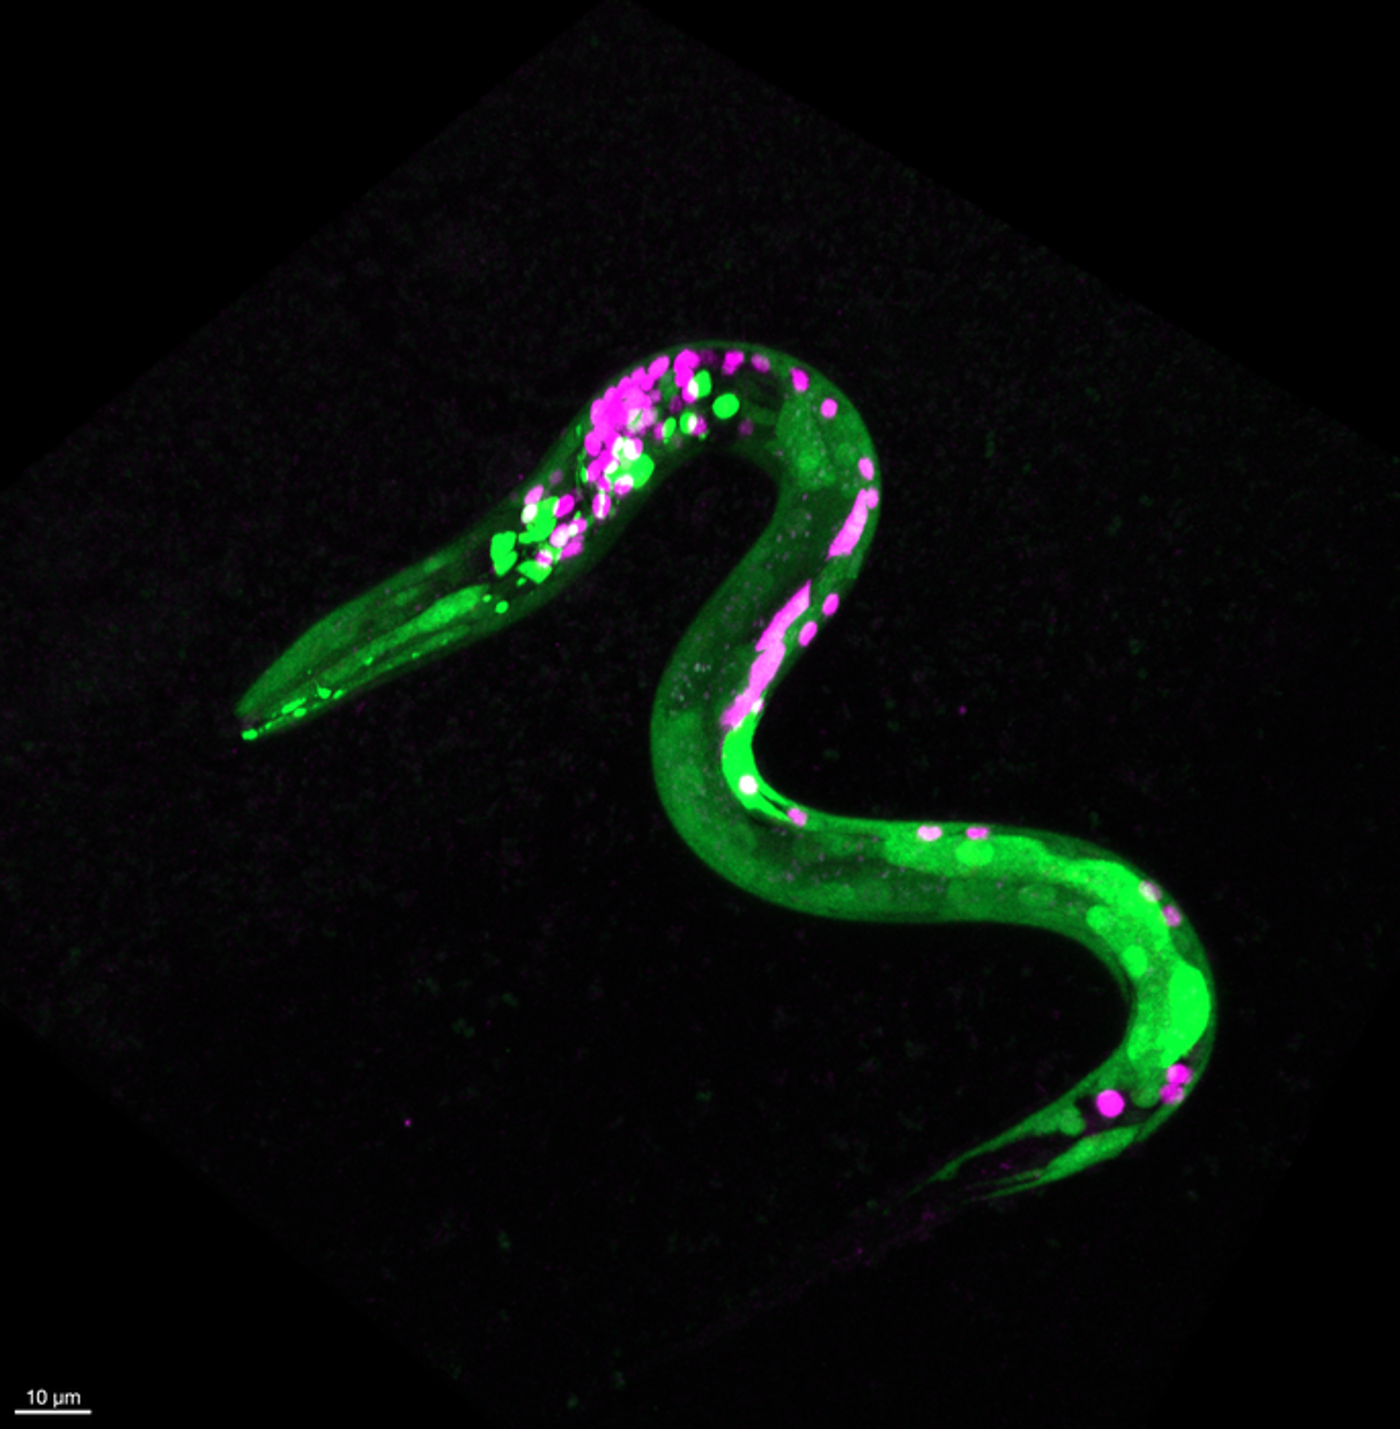 A genetically engineered worm. (Image Credit: Stacy Levichev LICENSE: CC BY-SA)